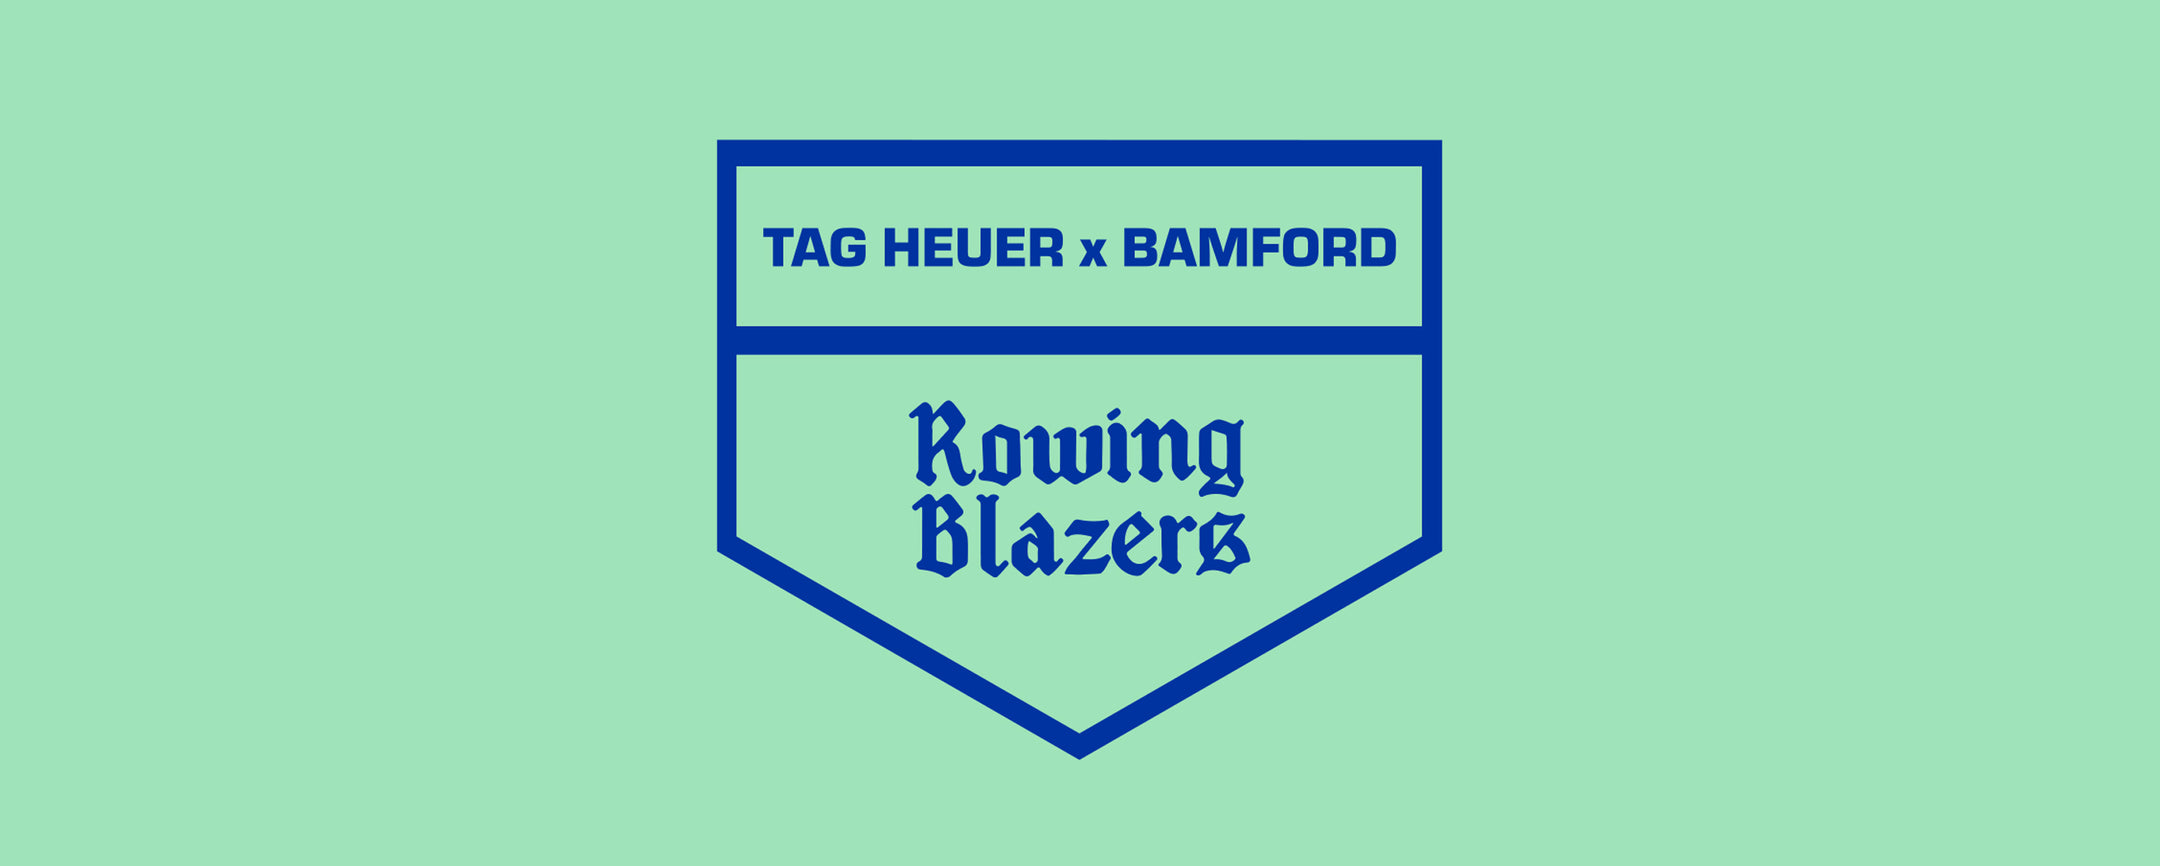 YOU'RE INVITED: TAG HEUER X BAMFORD X ROWING BLAZERS